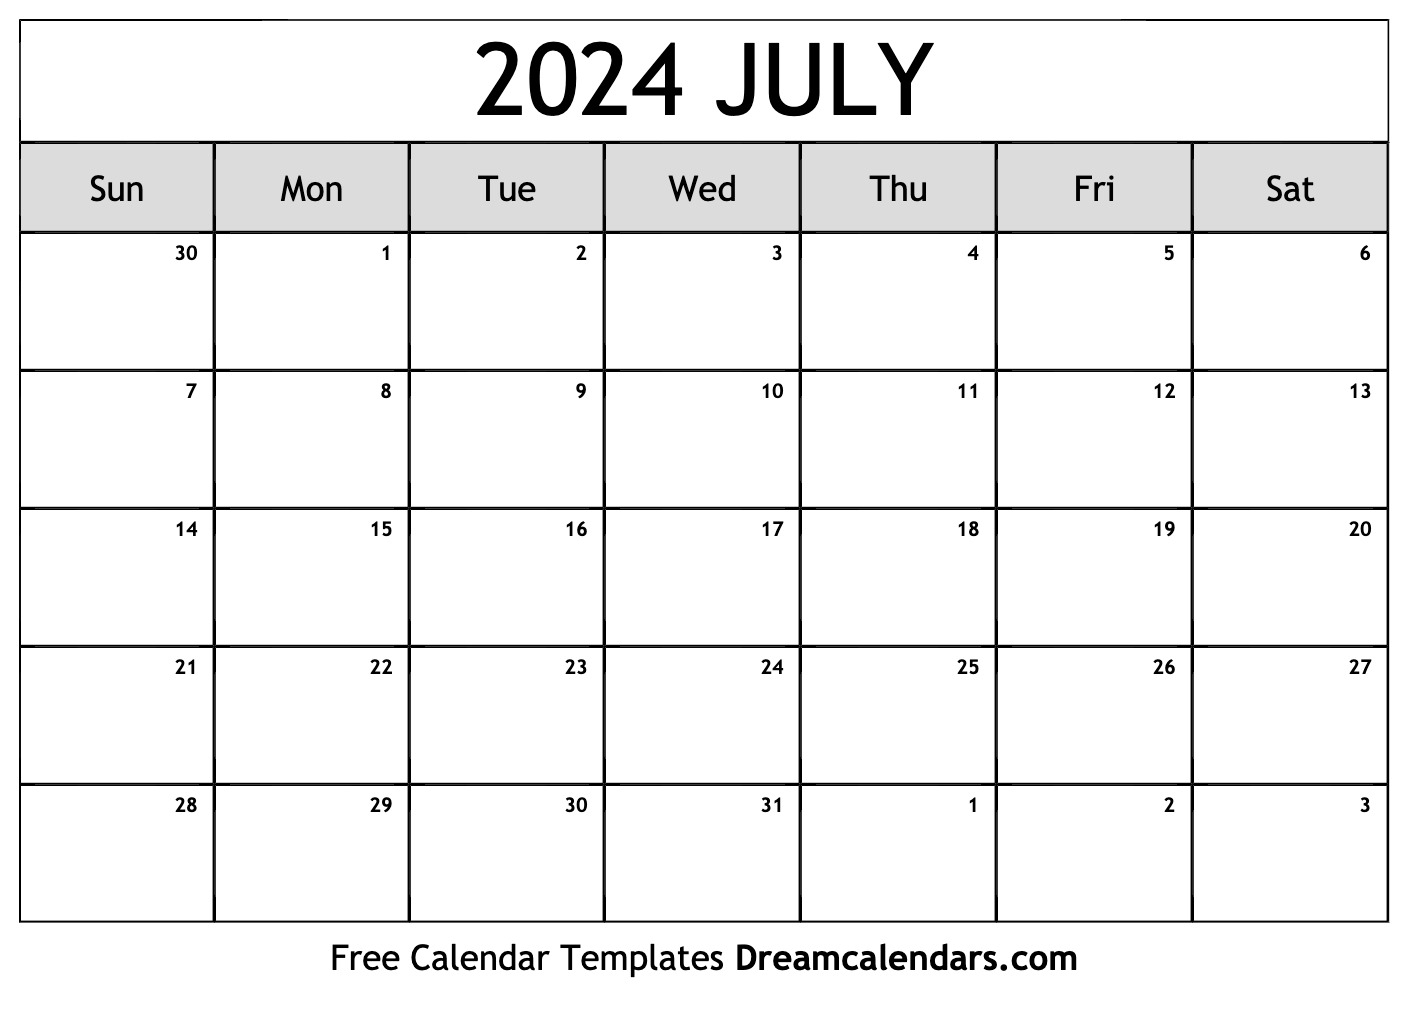 July 2024 Calendar | Free Blank Printable With Holidays for July Printable Calendar 2024 Free